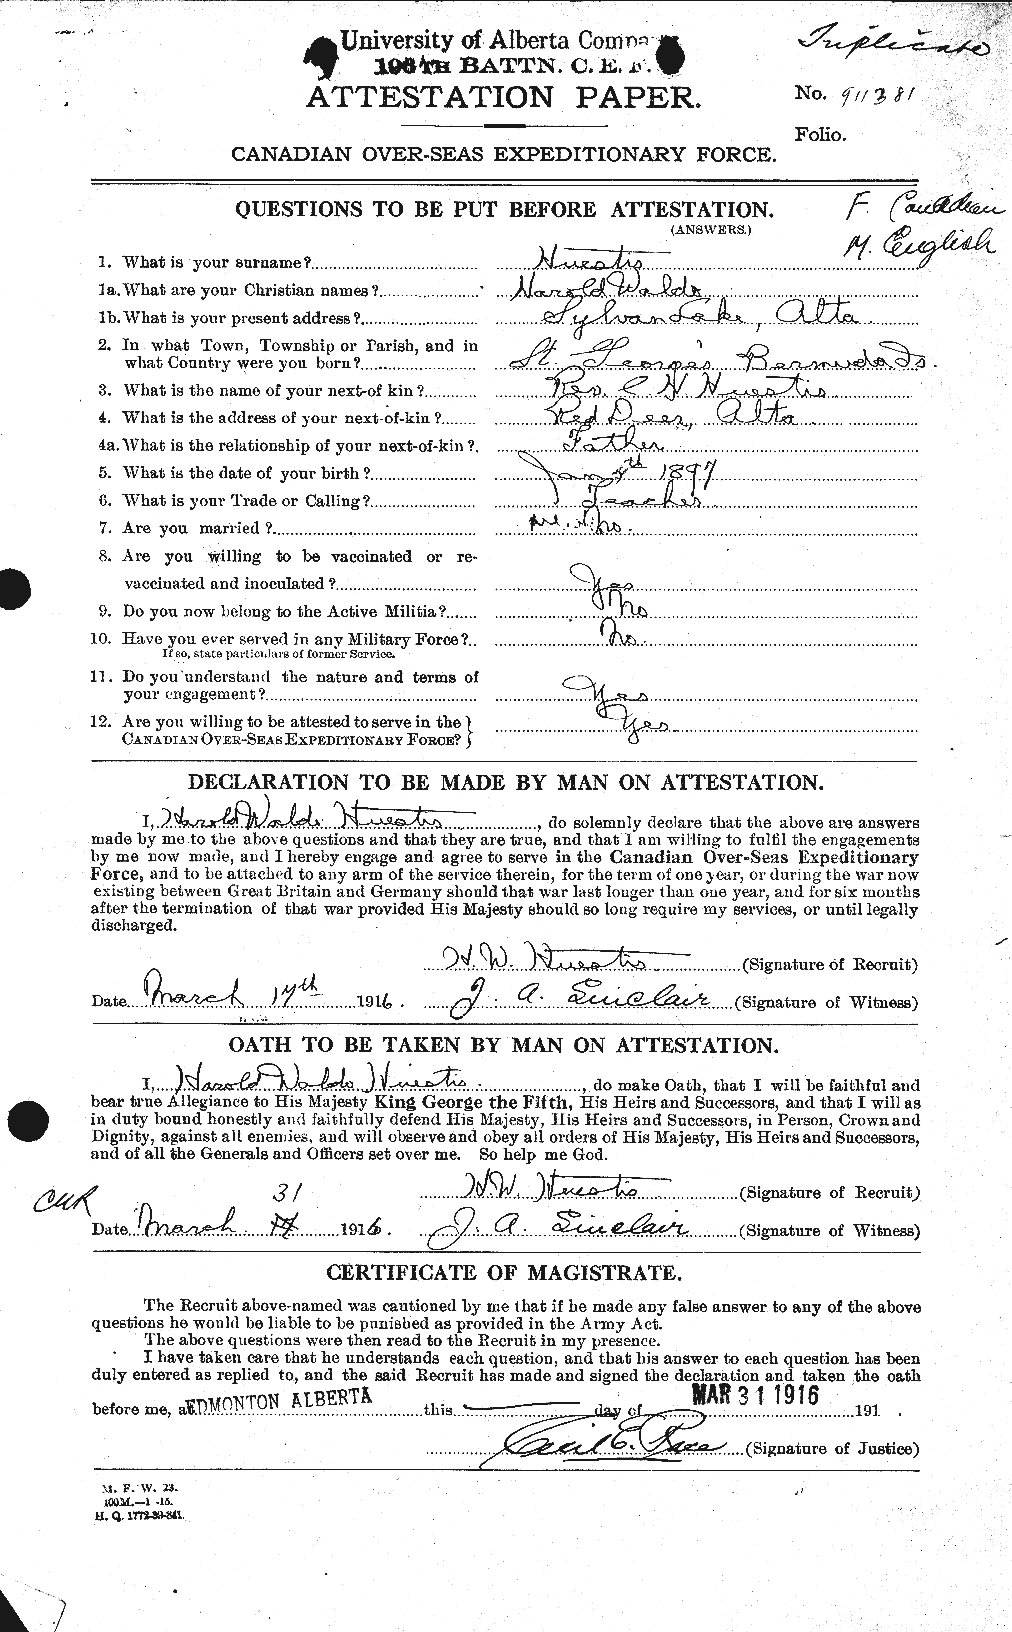 Personnel Records of the First World War - CEF 399173a